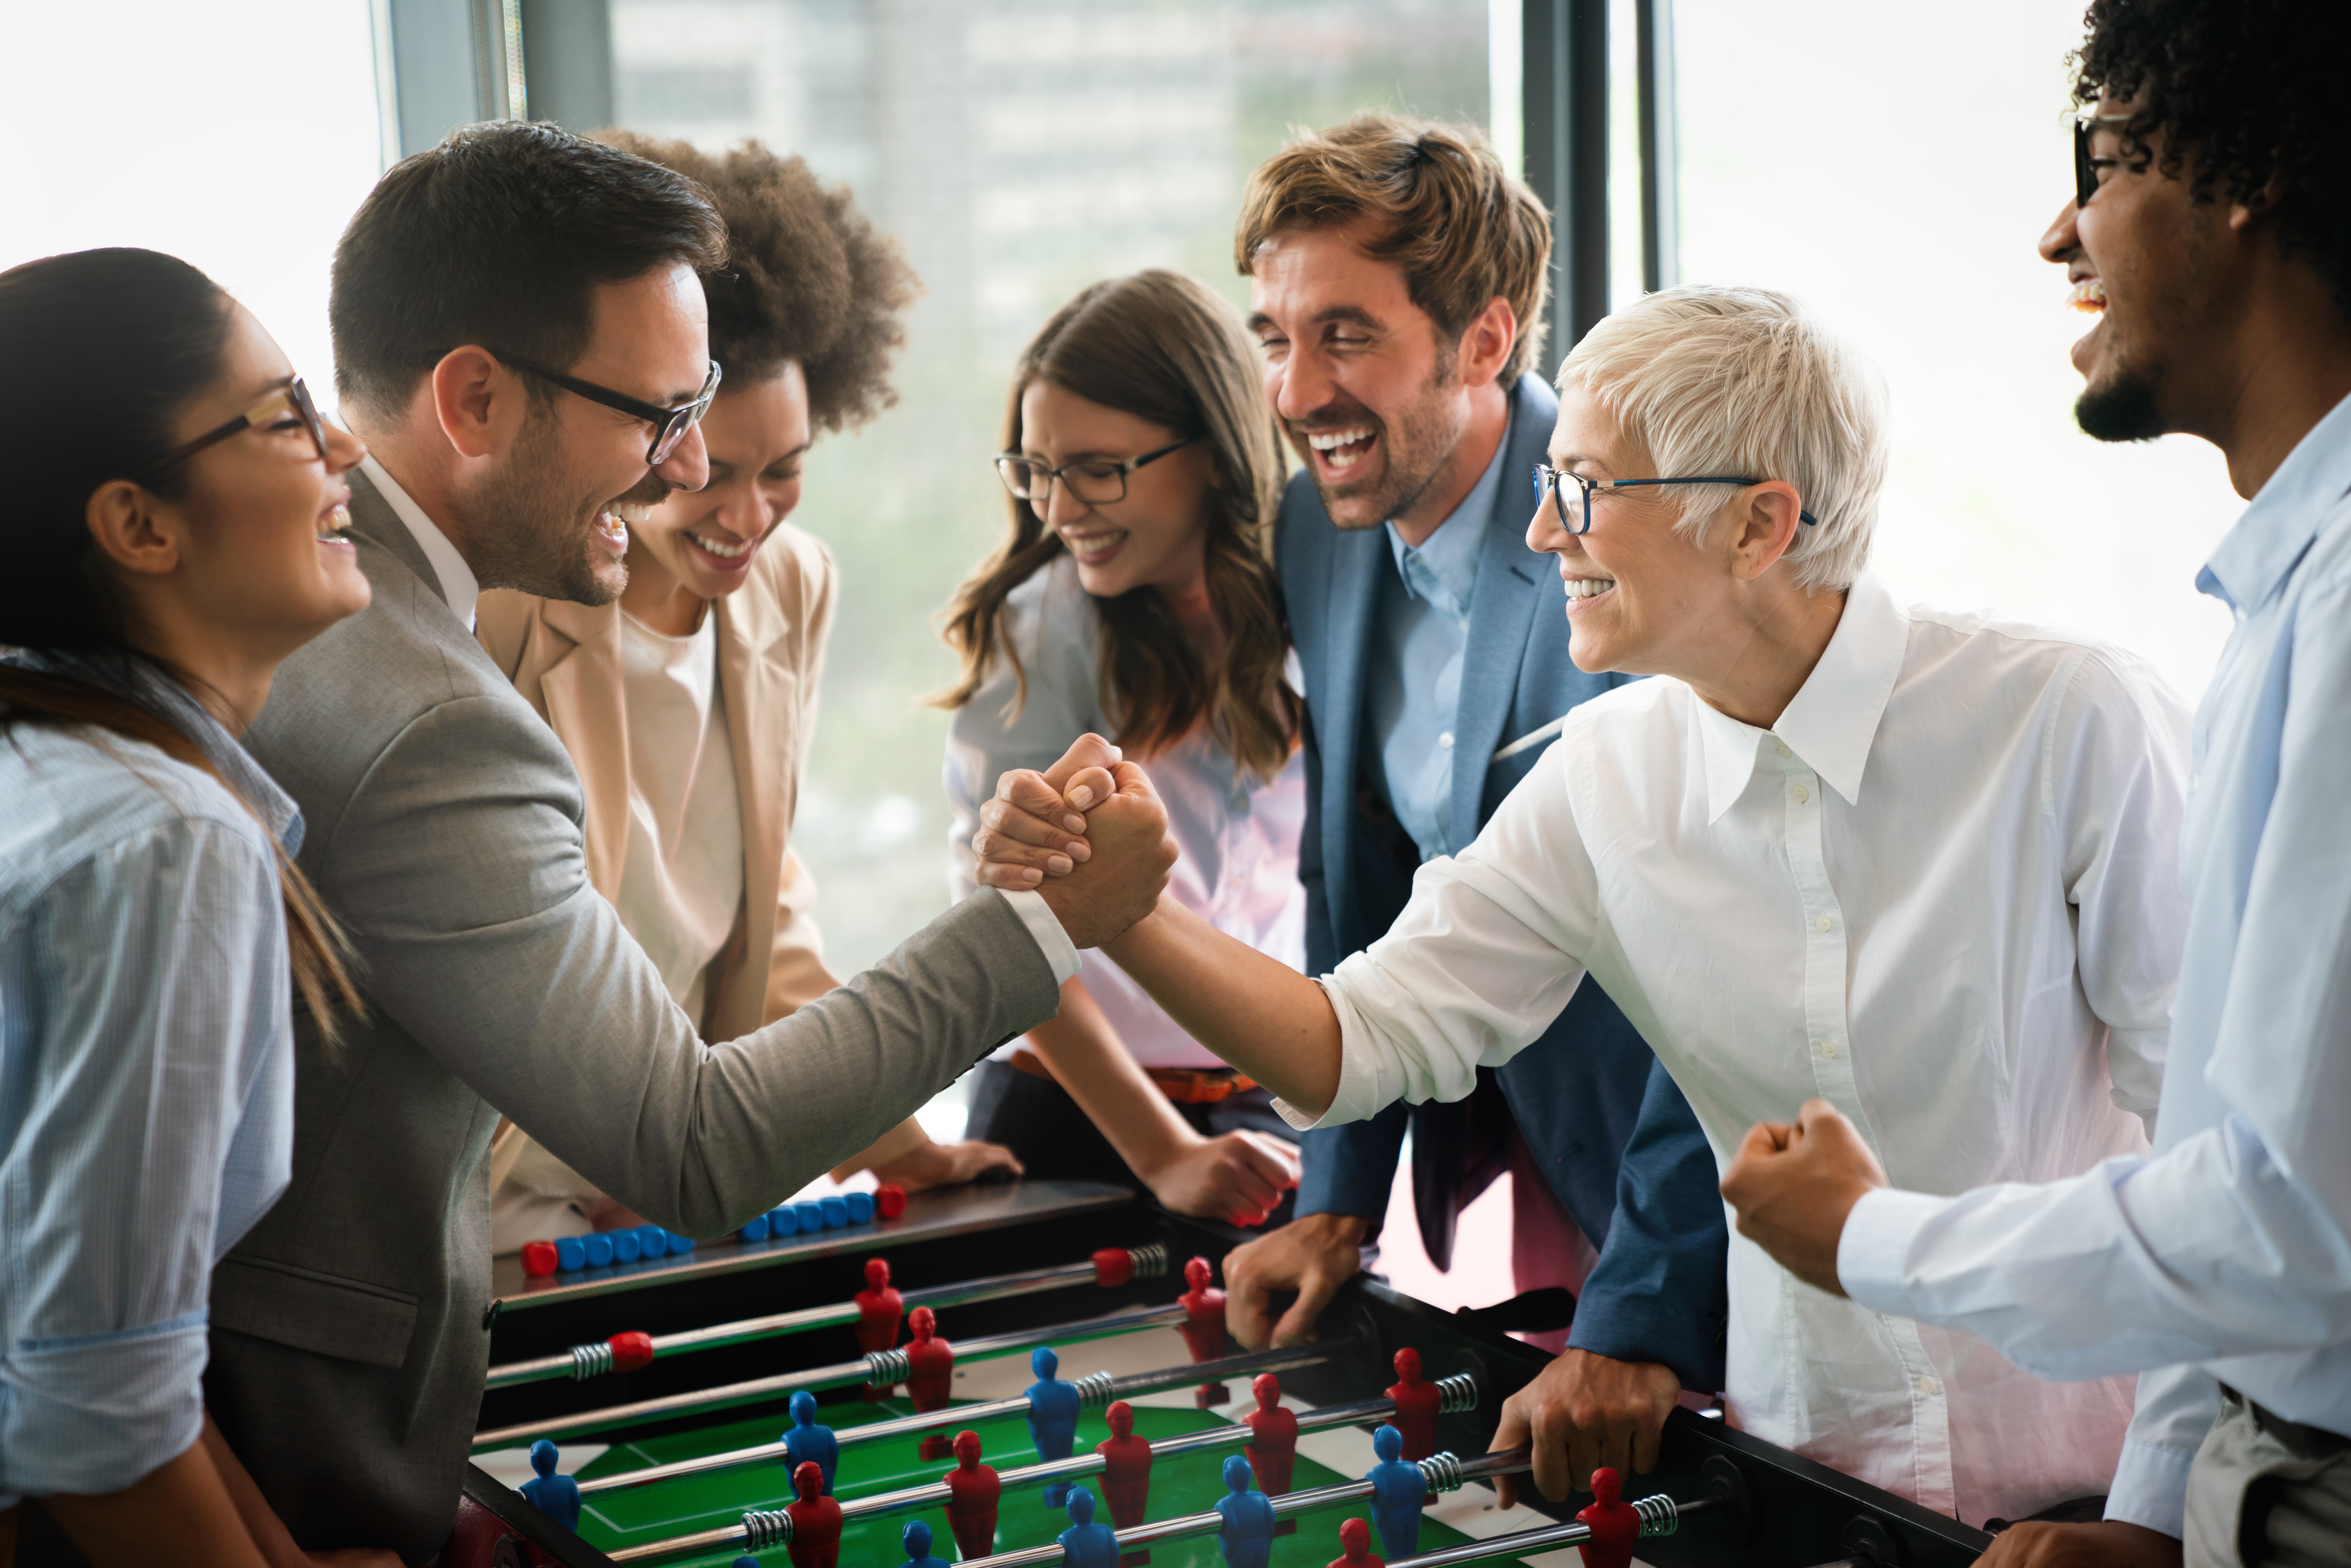 photo of group playing foosball, dressed professionally for office, one, appears to be woman, white, gray hair, dap (dignity and pride) handshake with man, brown, looking younger, surrounded by mixed group
